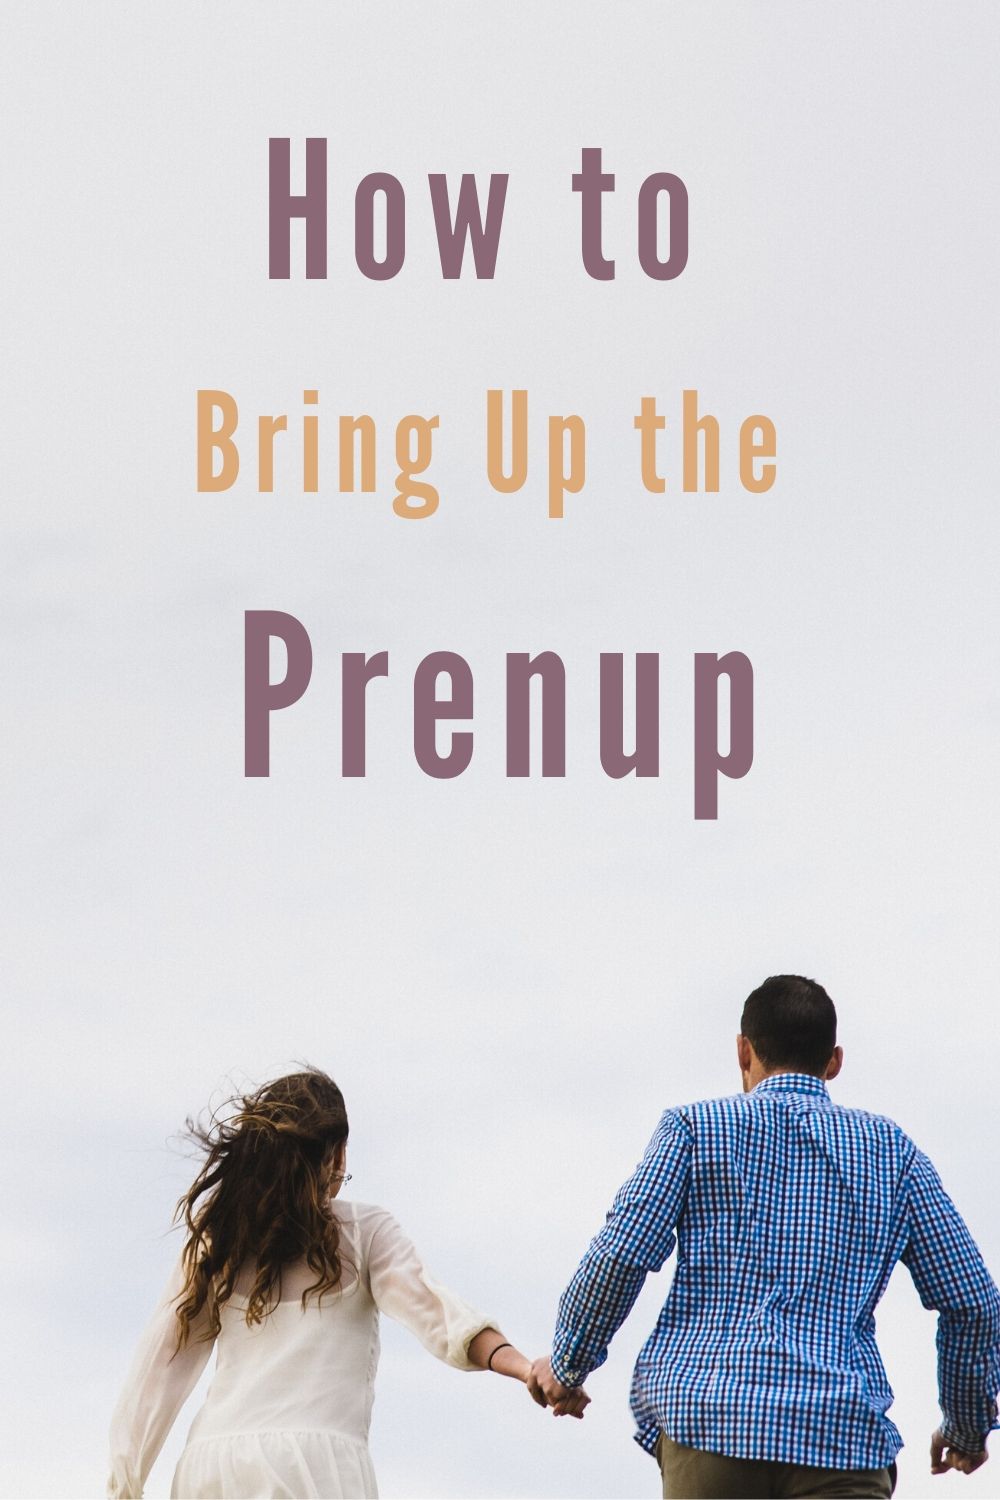 Here's what you can do to ask for a fair, equitable prenup.